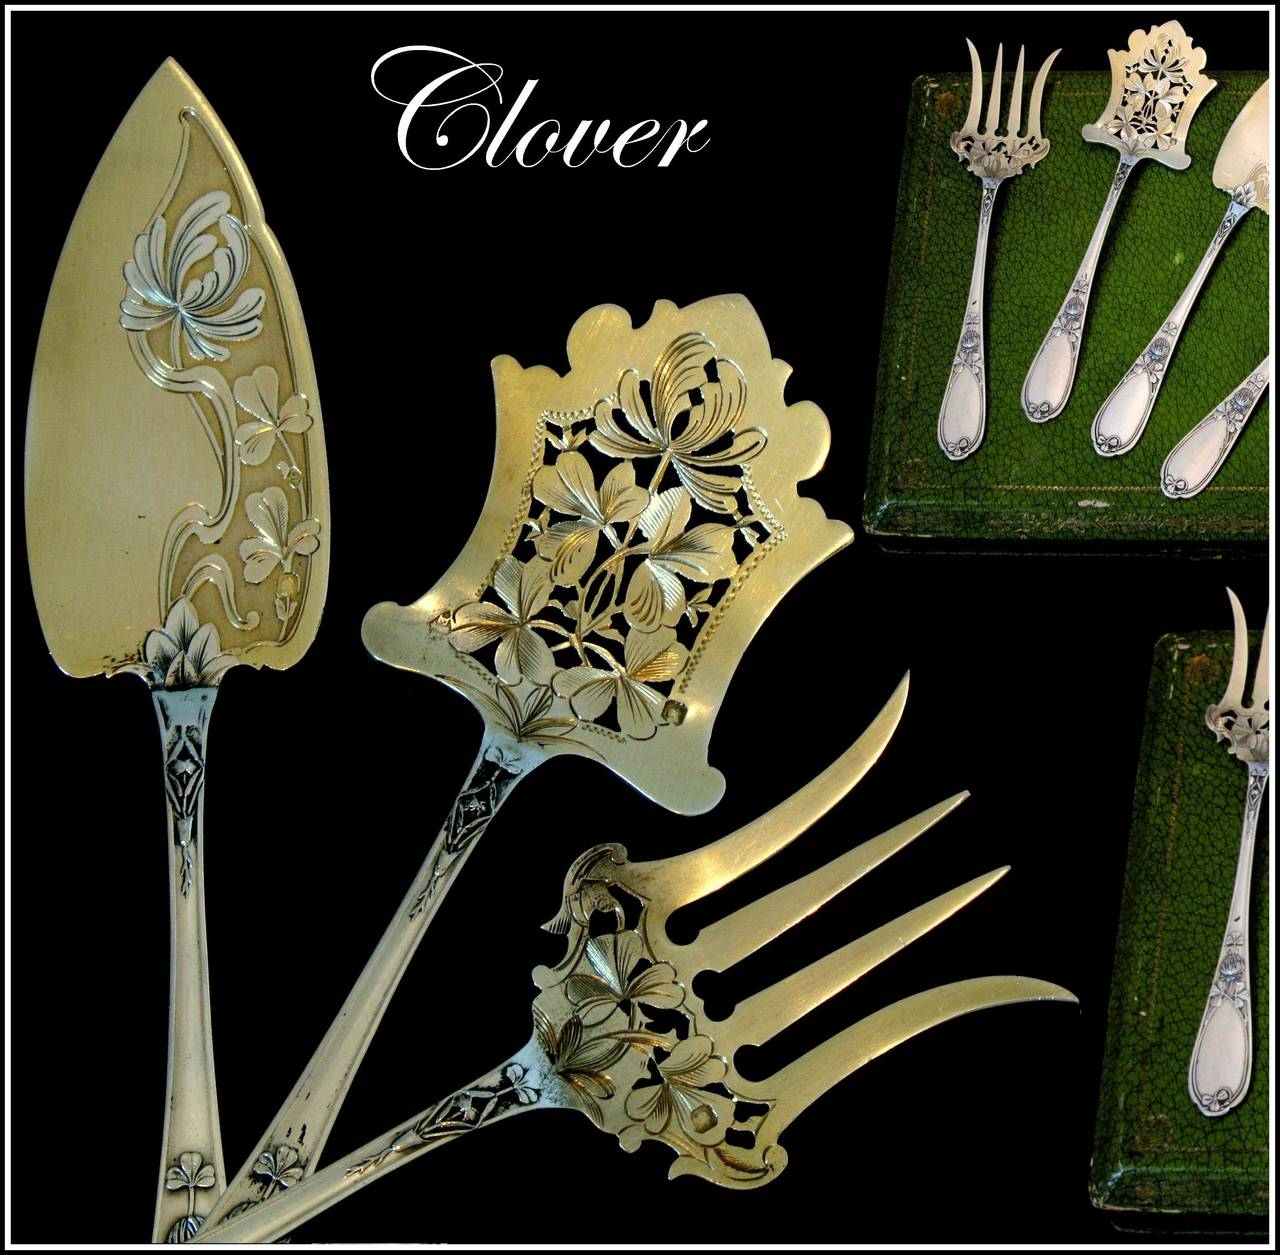 Ernie Rare French All Sterling Silver Vermeil Hors D'Oeuvre Set 4 pc box Clovers

Head of Minerve 1 st titre for 950/1000 French Sterling Silver Vermeil guarantee

Four pieces of truly exceptional quality, for the richness of their decoration,